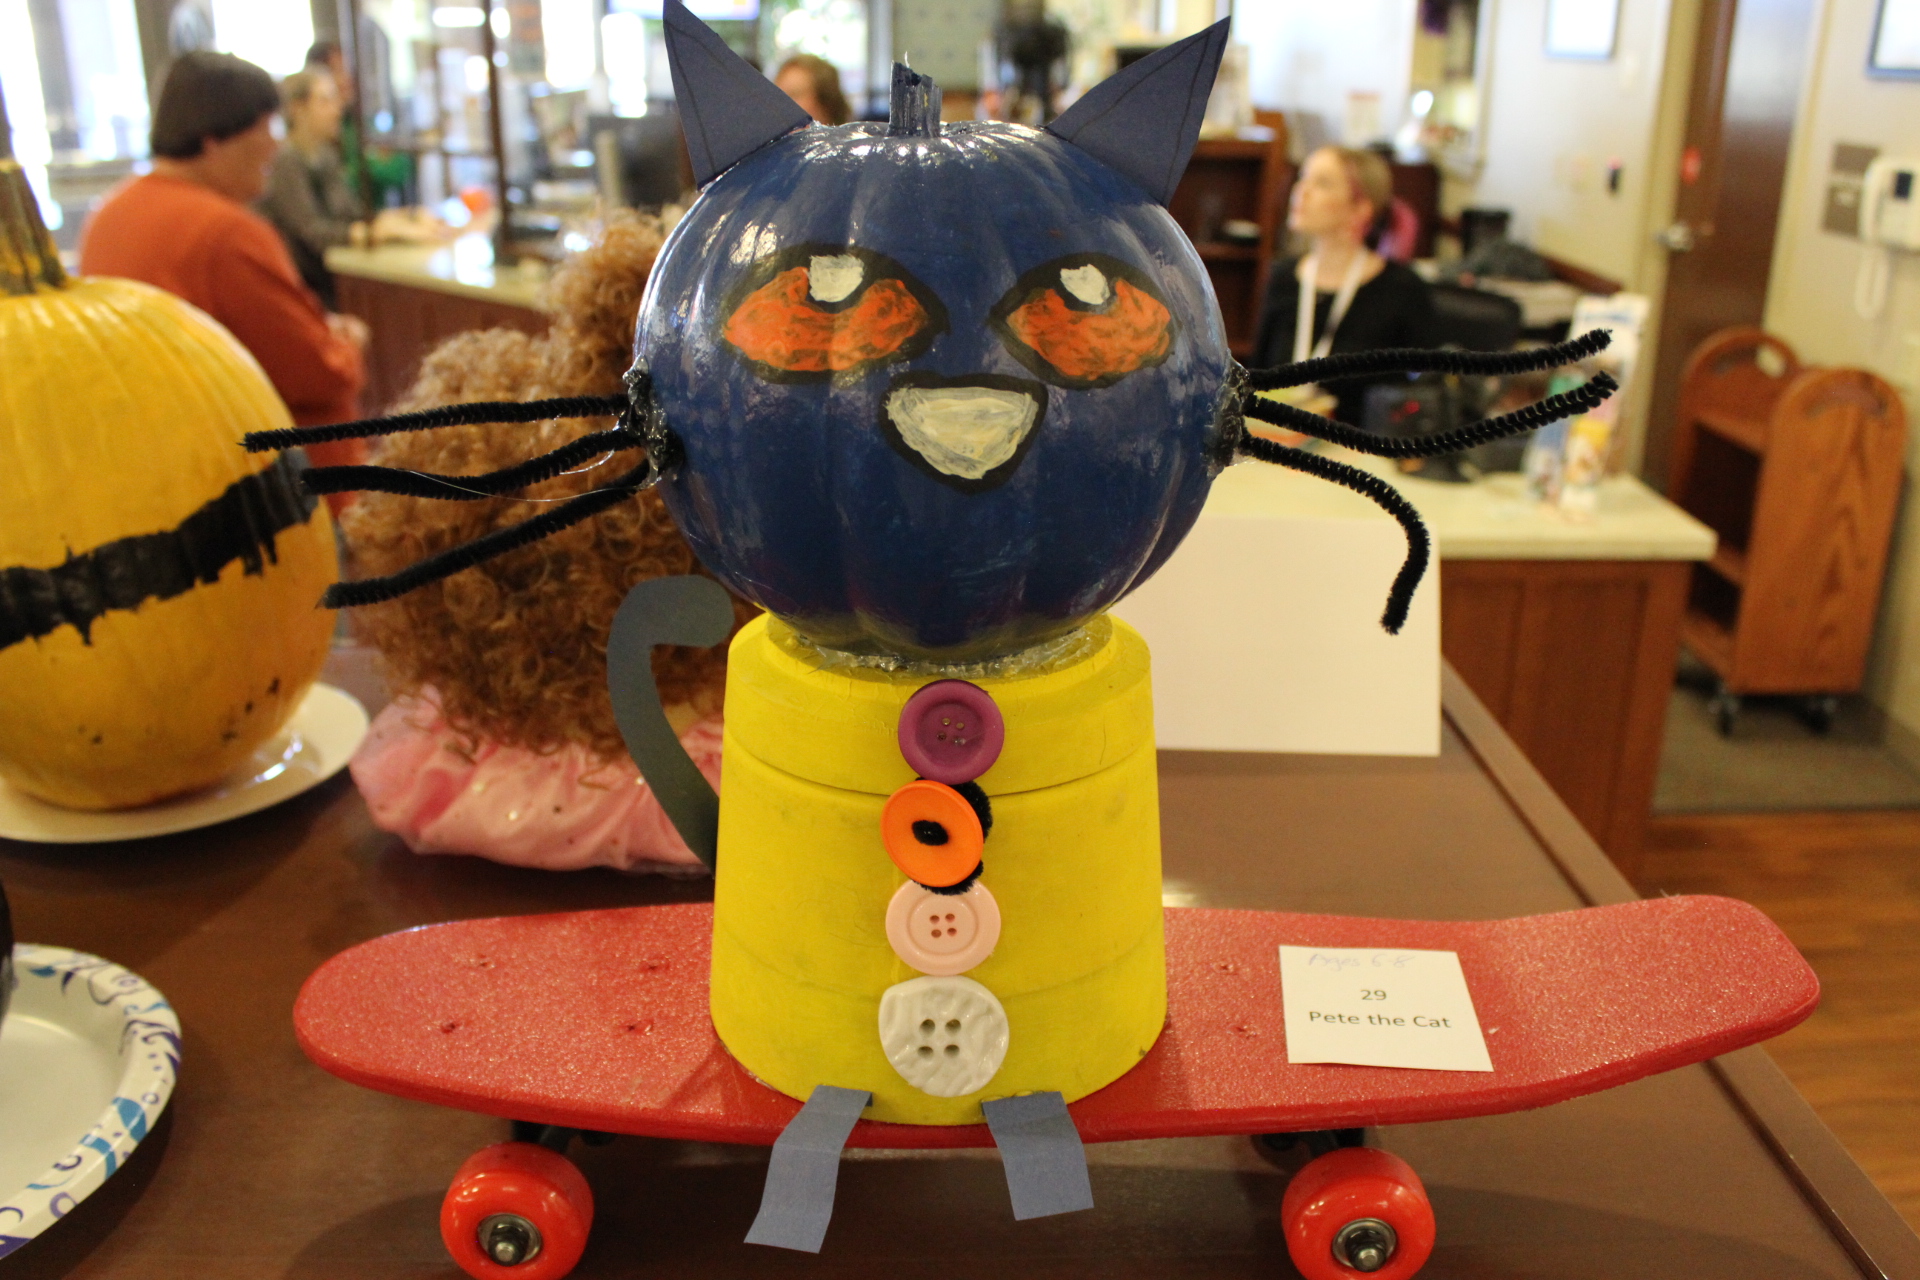 Pumpkin decorated as "Pete the Cat"